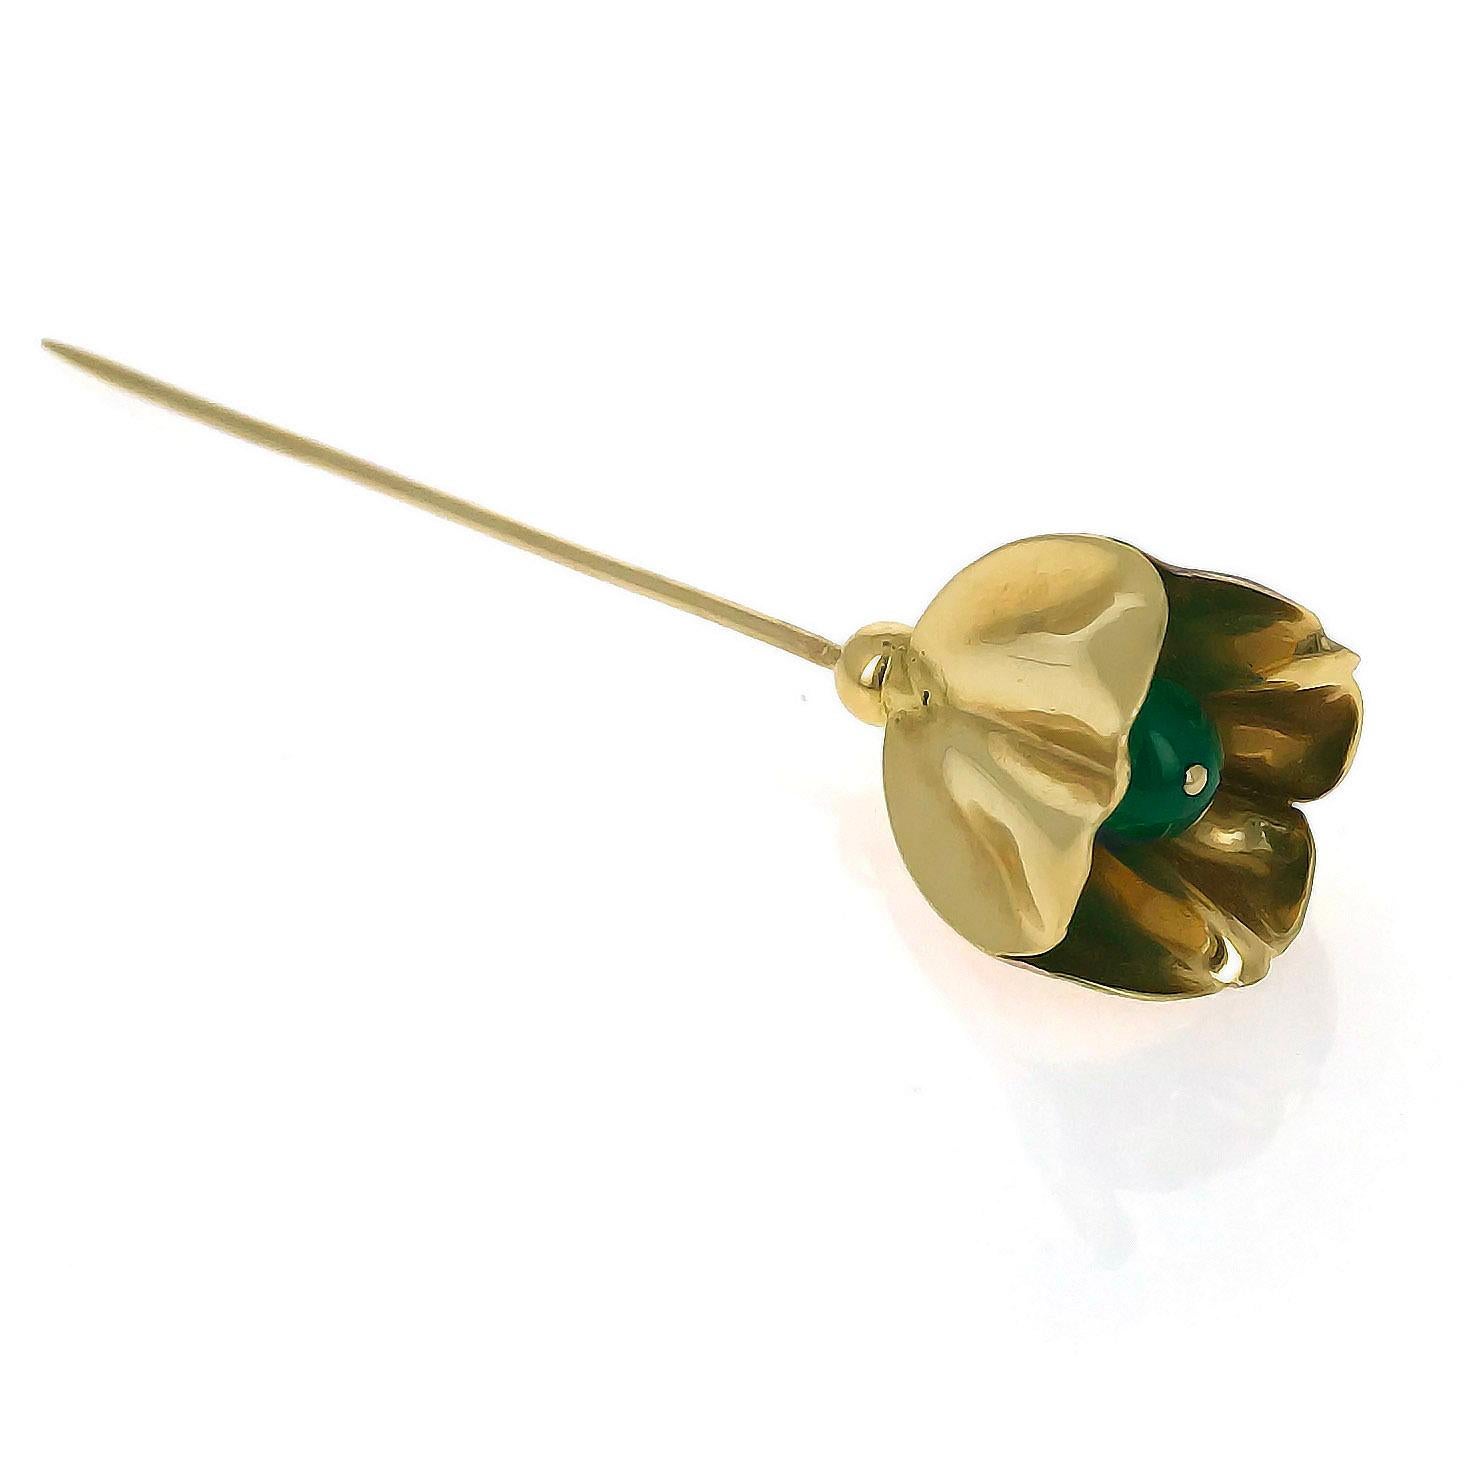 This Cartier stick pin brooch was created circa 1950. It is designed as a tulip and centers upon a chalcedony bead. It is mounted in 14 karat yellow gold. This brooch is signed and numbered. 